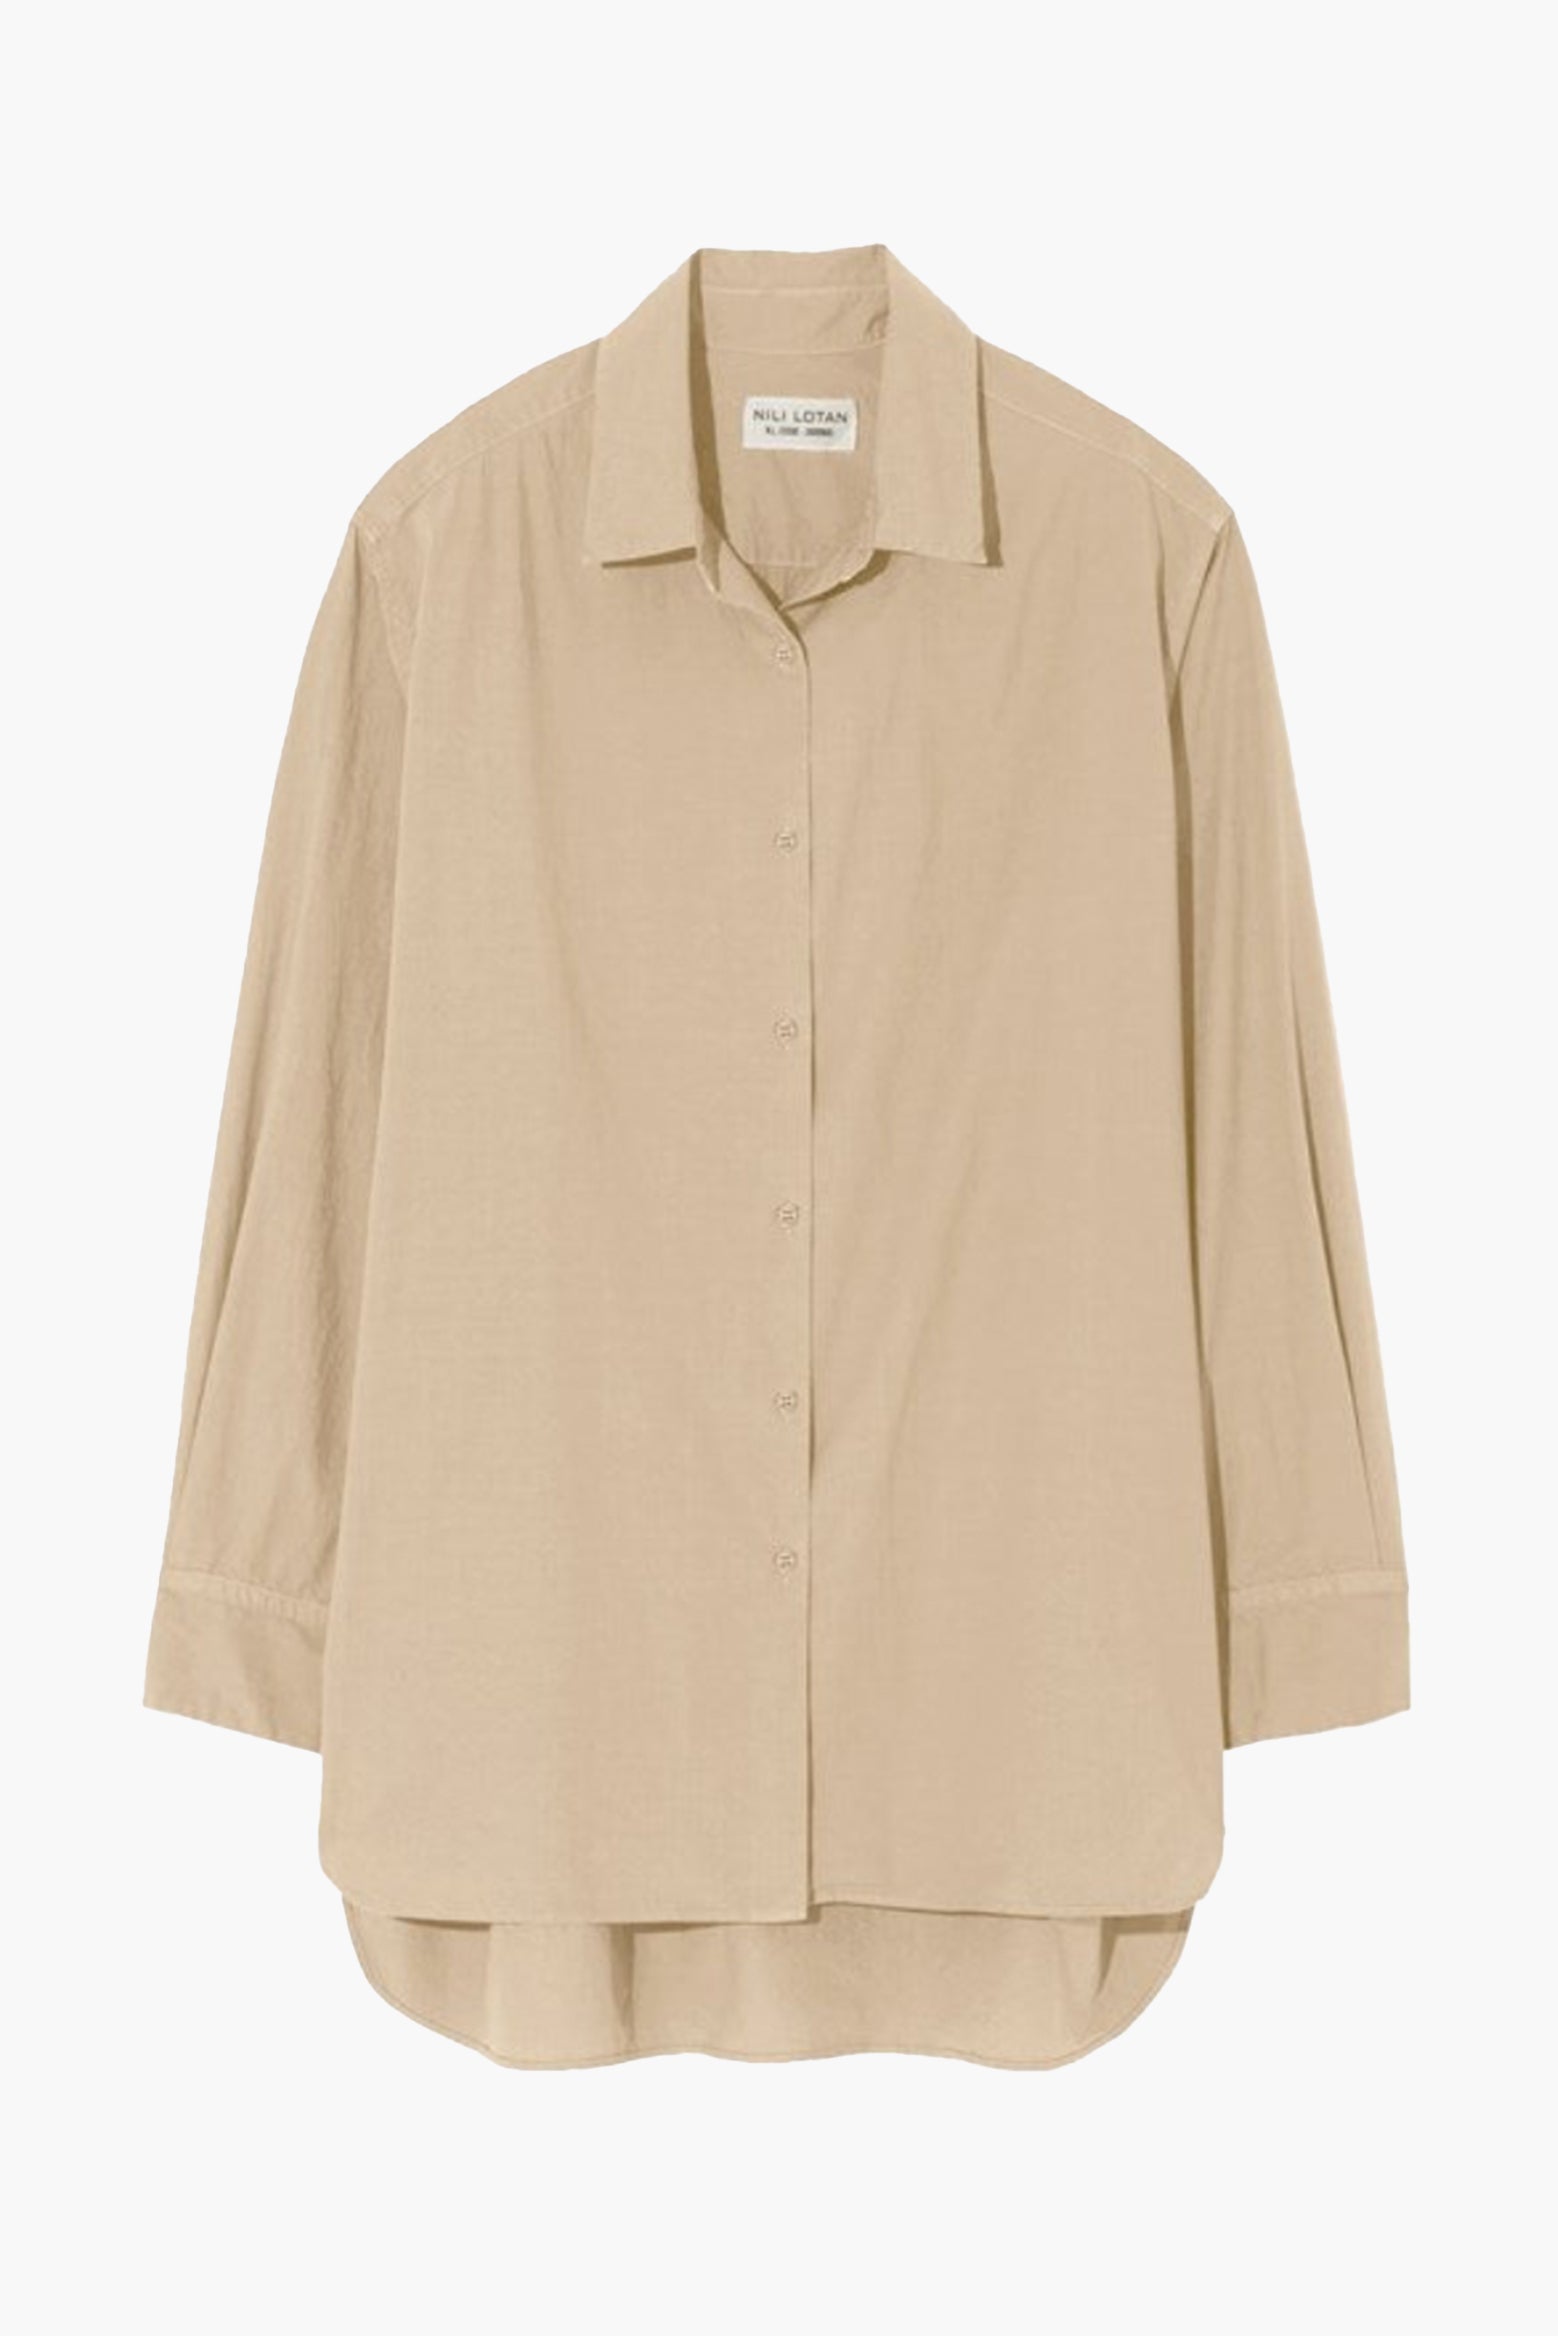 Nili Lotan Yorke Shirt in Sandstone available at The New Trend Australia. 